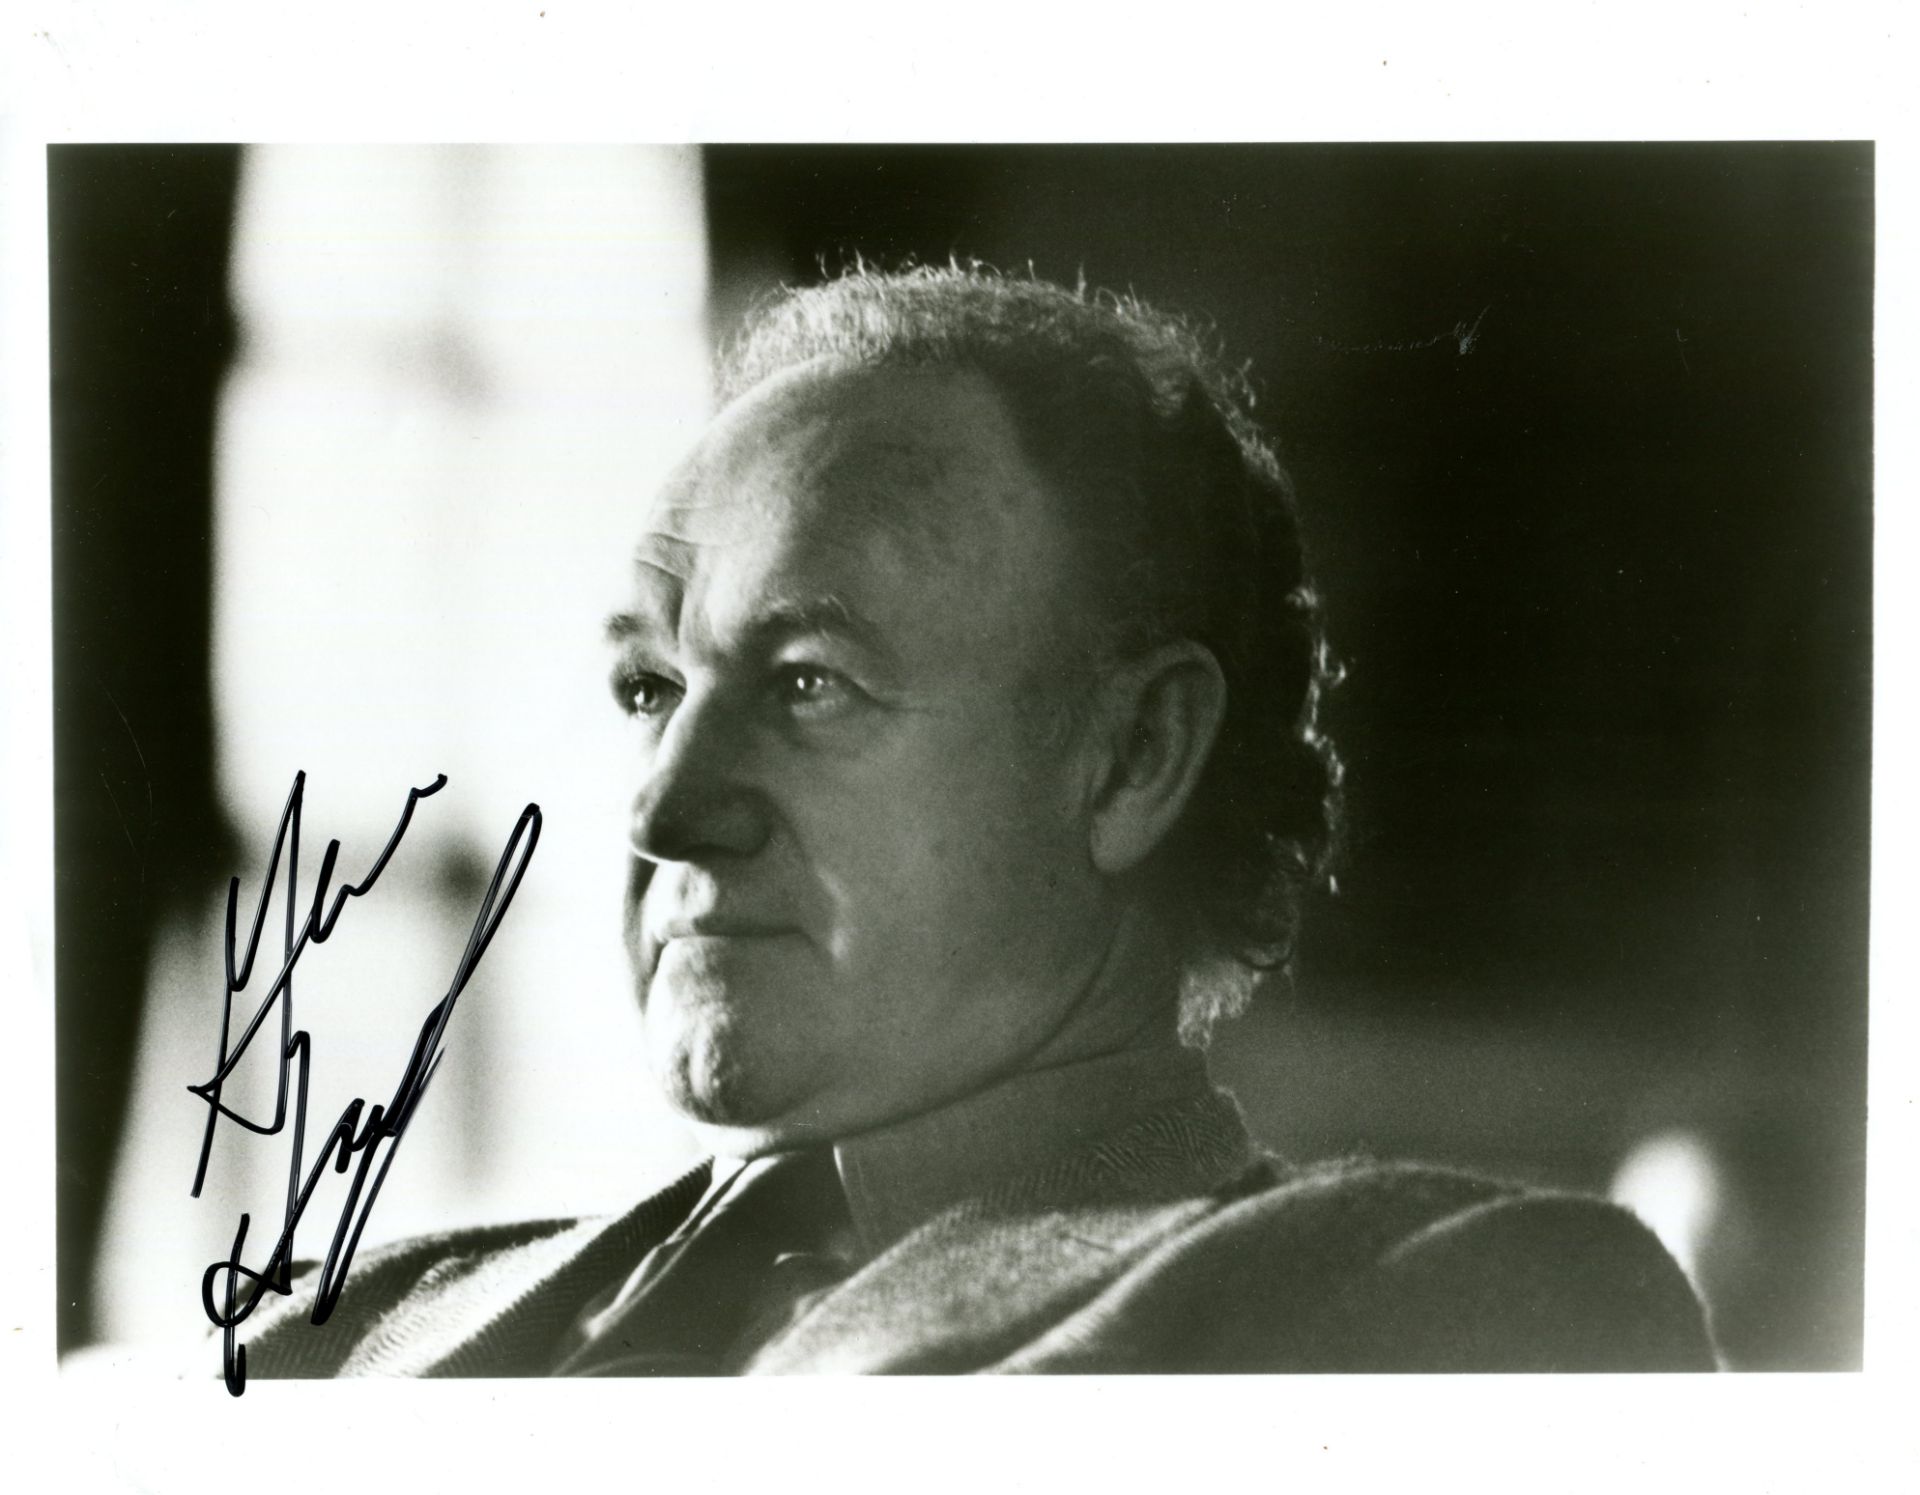 ACADEMY AWARD WINNERS: Selection of signed 8 x 10 photographs by various Oscar winning film actors